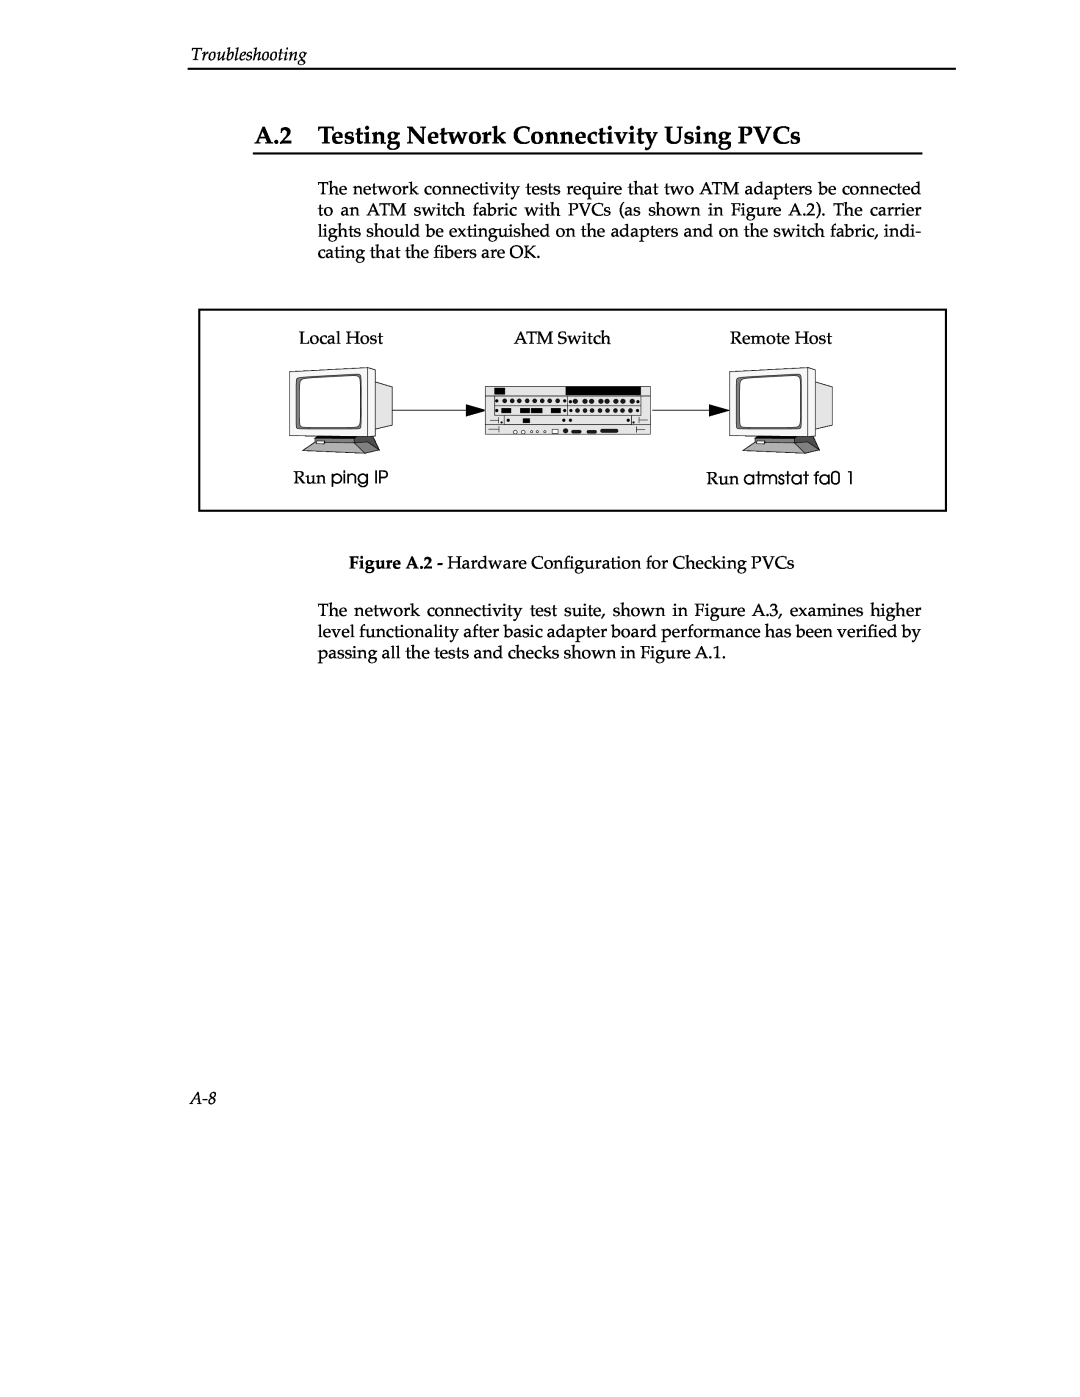 Cabletron Systems 9A000 manual A.2 Testing Network Connectivity Using PVCs, Troubleshooting 